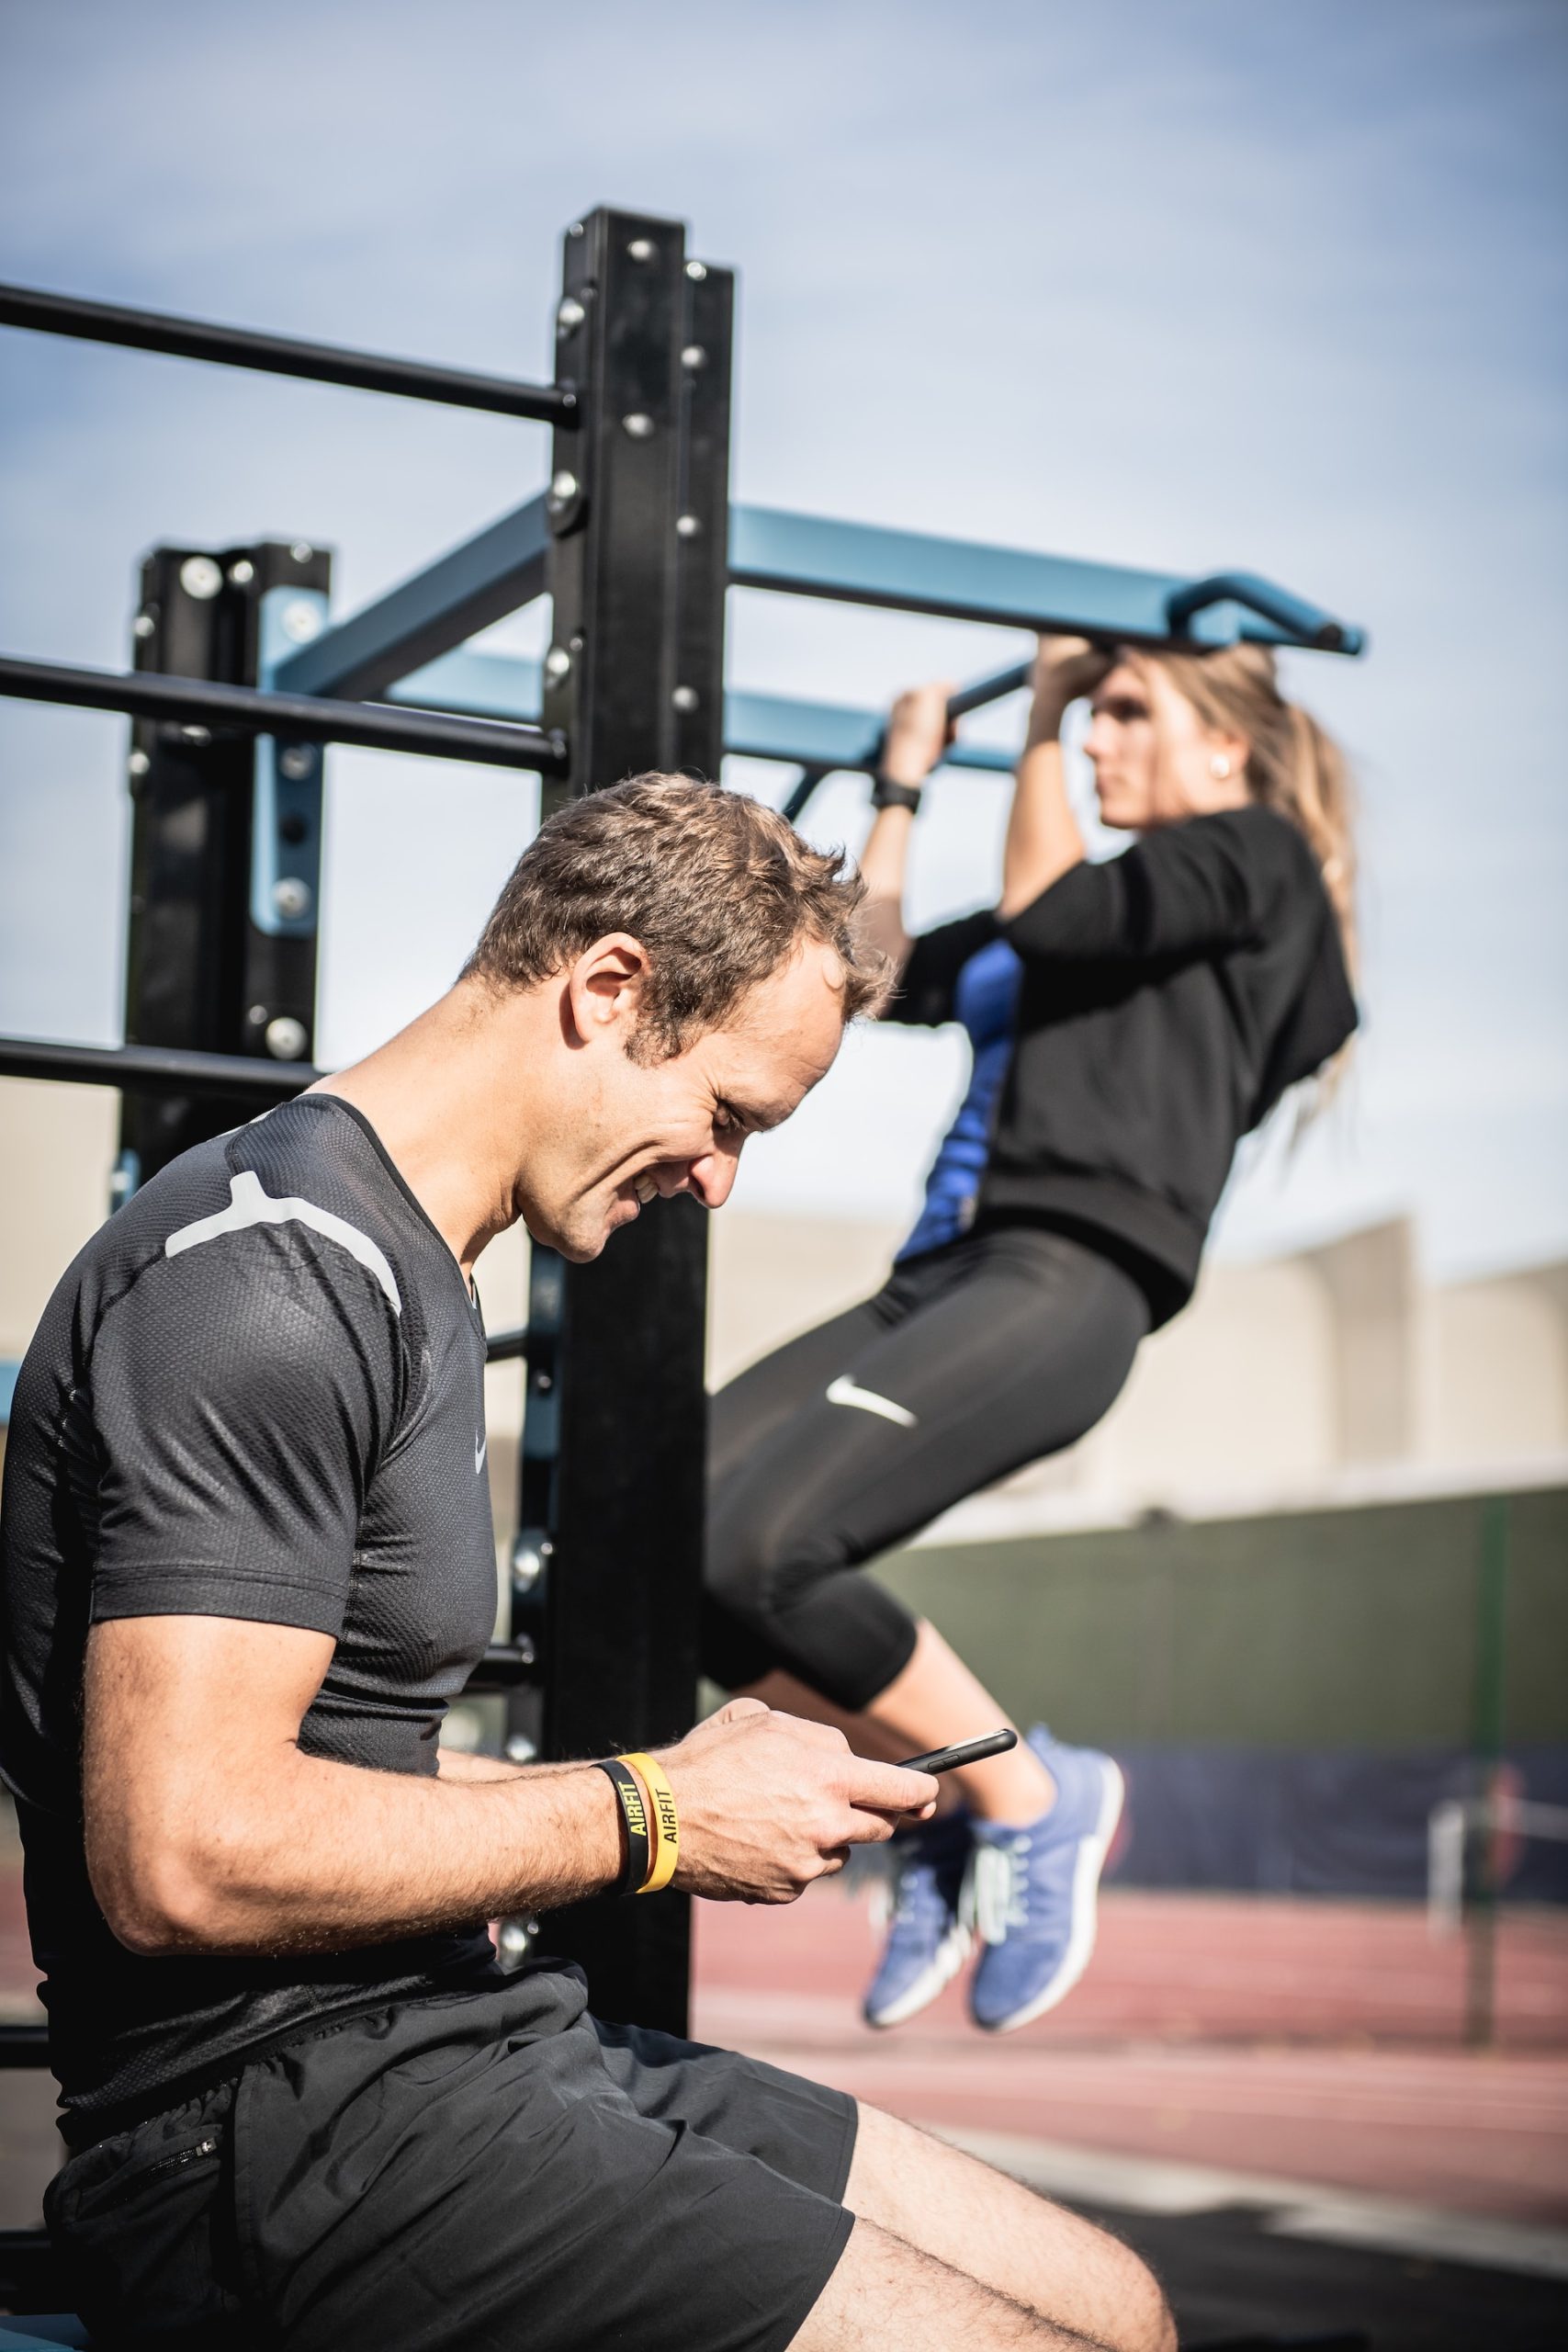 the image shows a man sitting on the phone and a woman pulling up on the horizontal bar